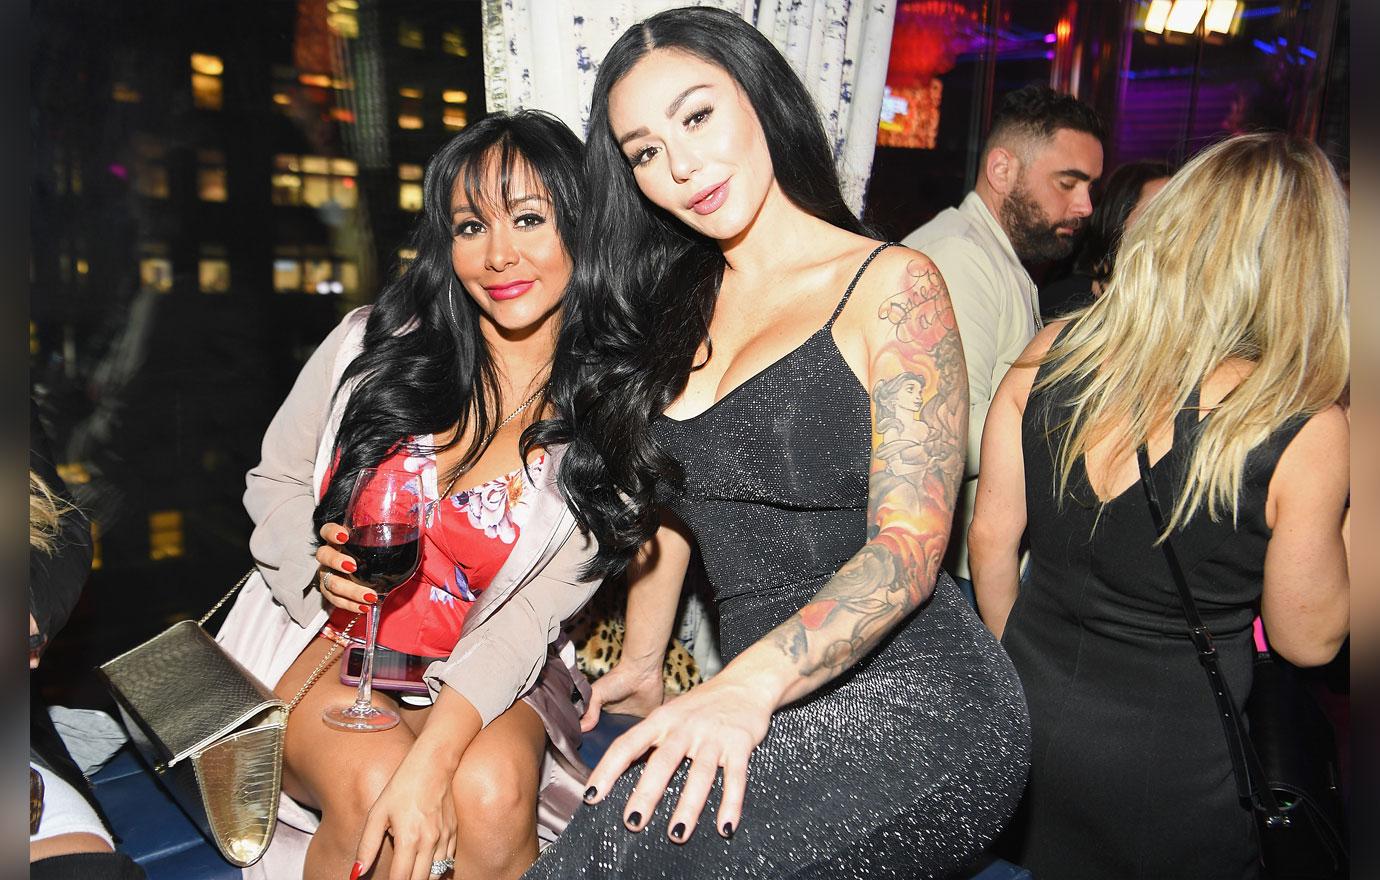 Snooki Speaks Out in Defense of JWoww Amid Roger Mathews' Rants